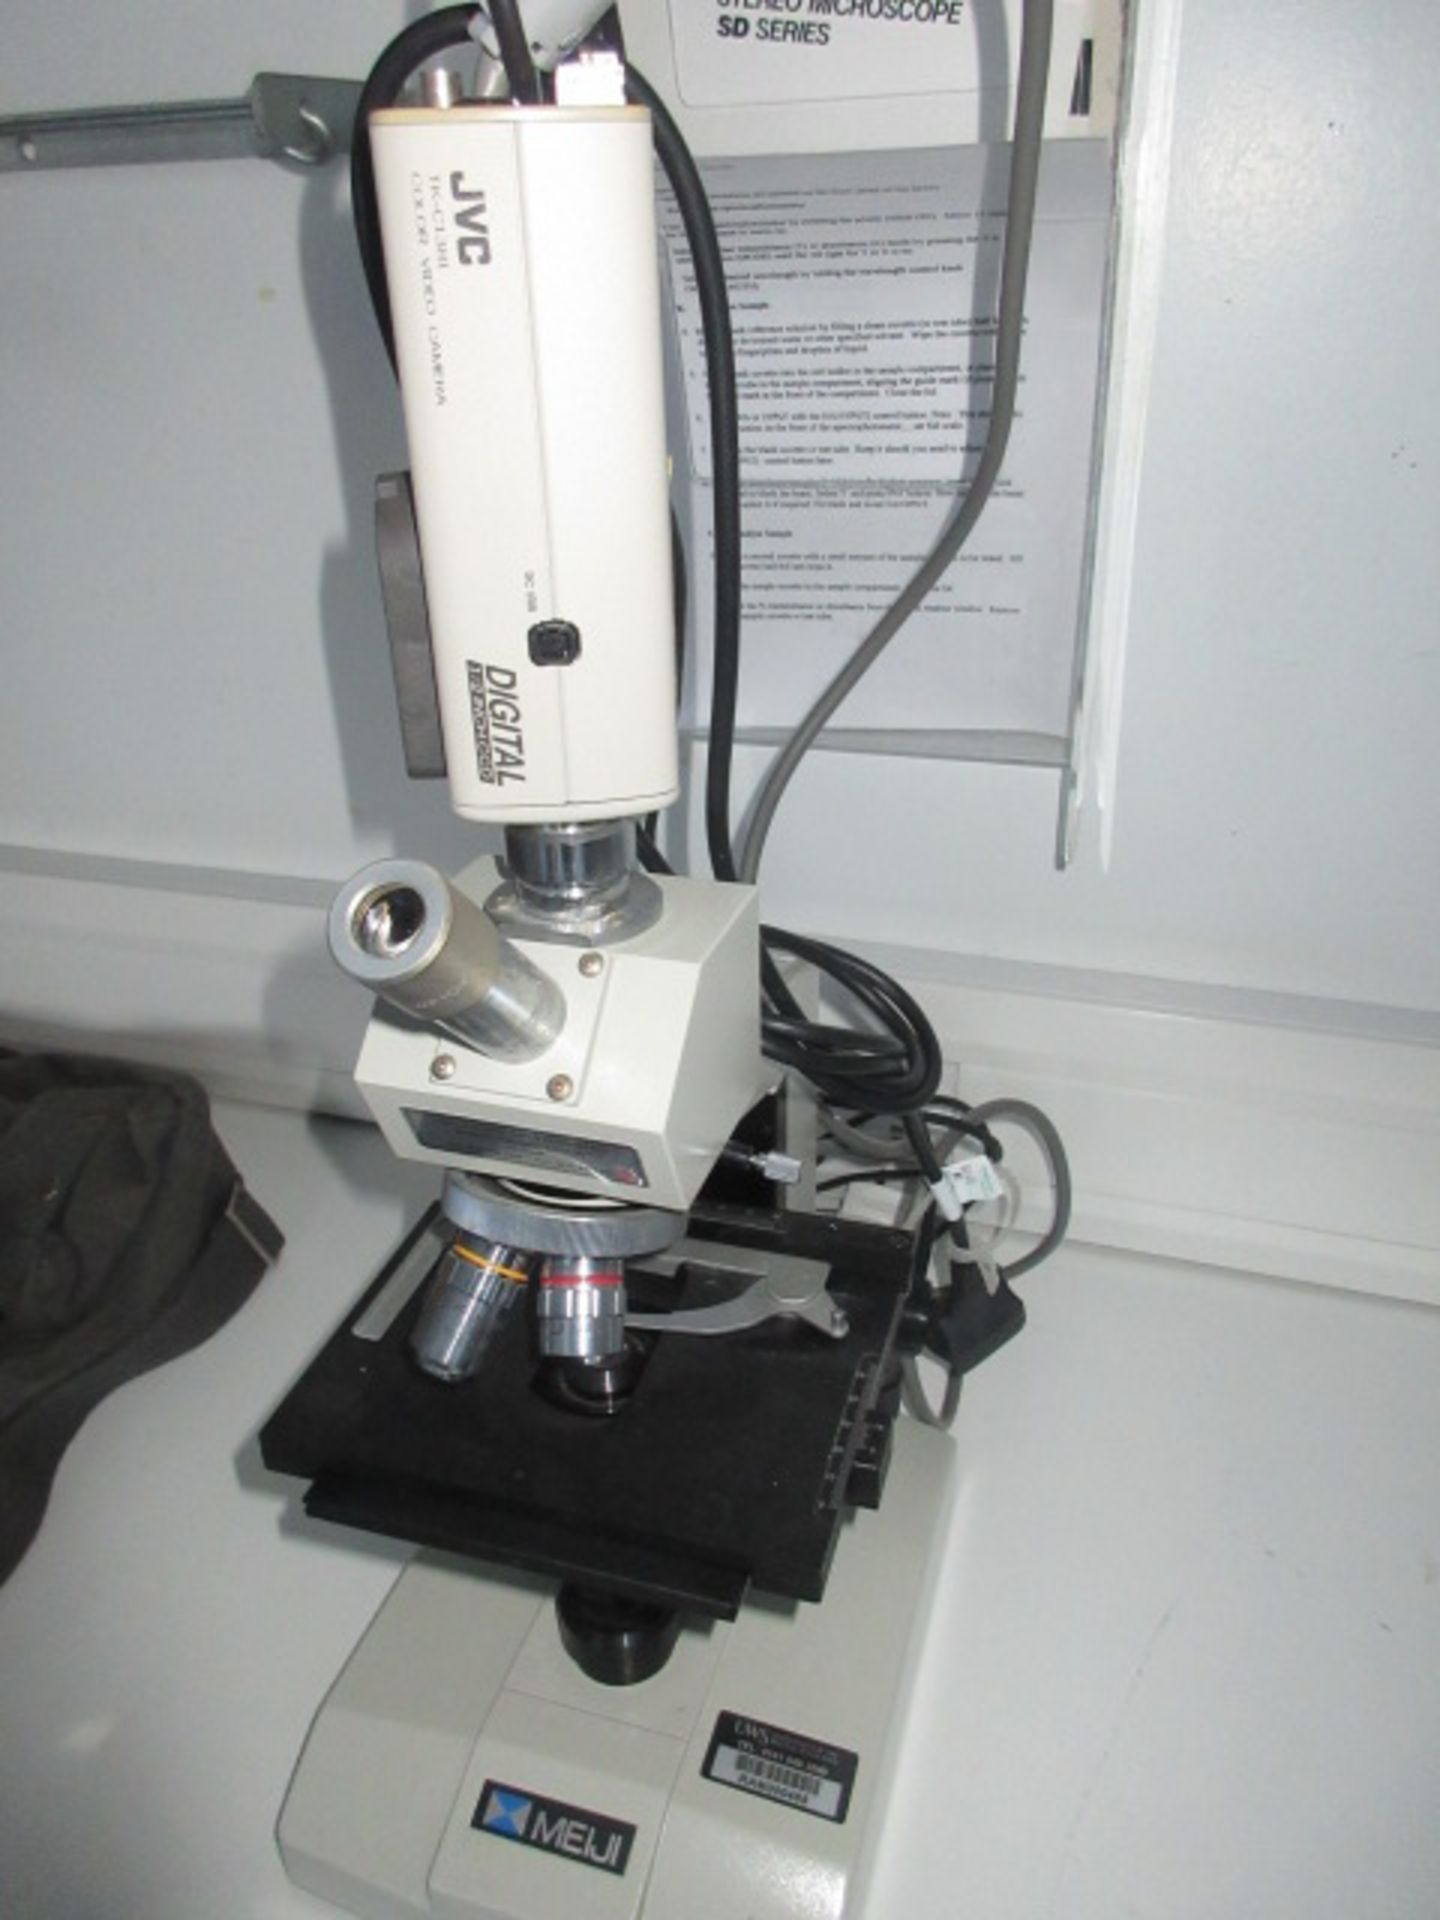 MEIJI ML 2000 BENCH TOP MICROSCOPE, 240V, 50/60 Hz, WITH SVC DIGITAL COLOUR VIDEO CAMERS SN 207644 - Image 2 of 3